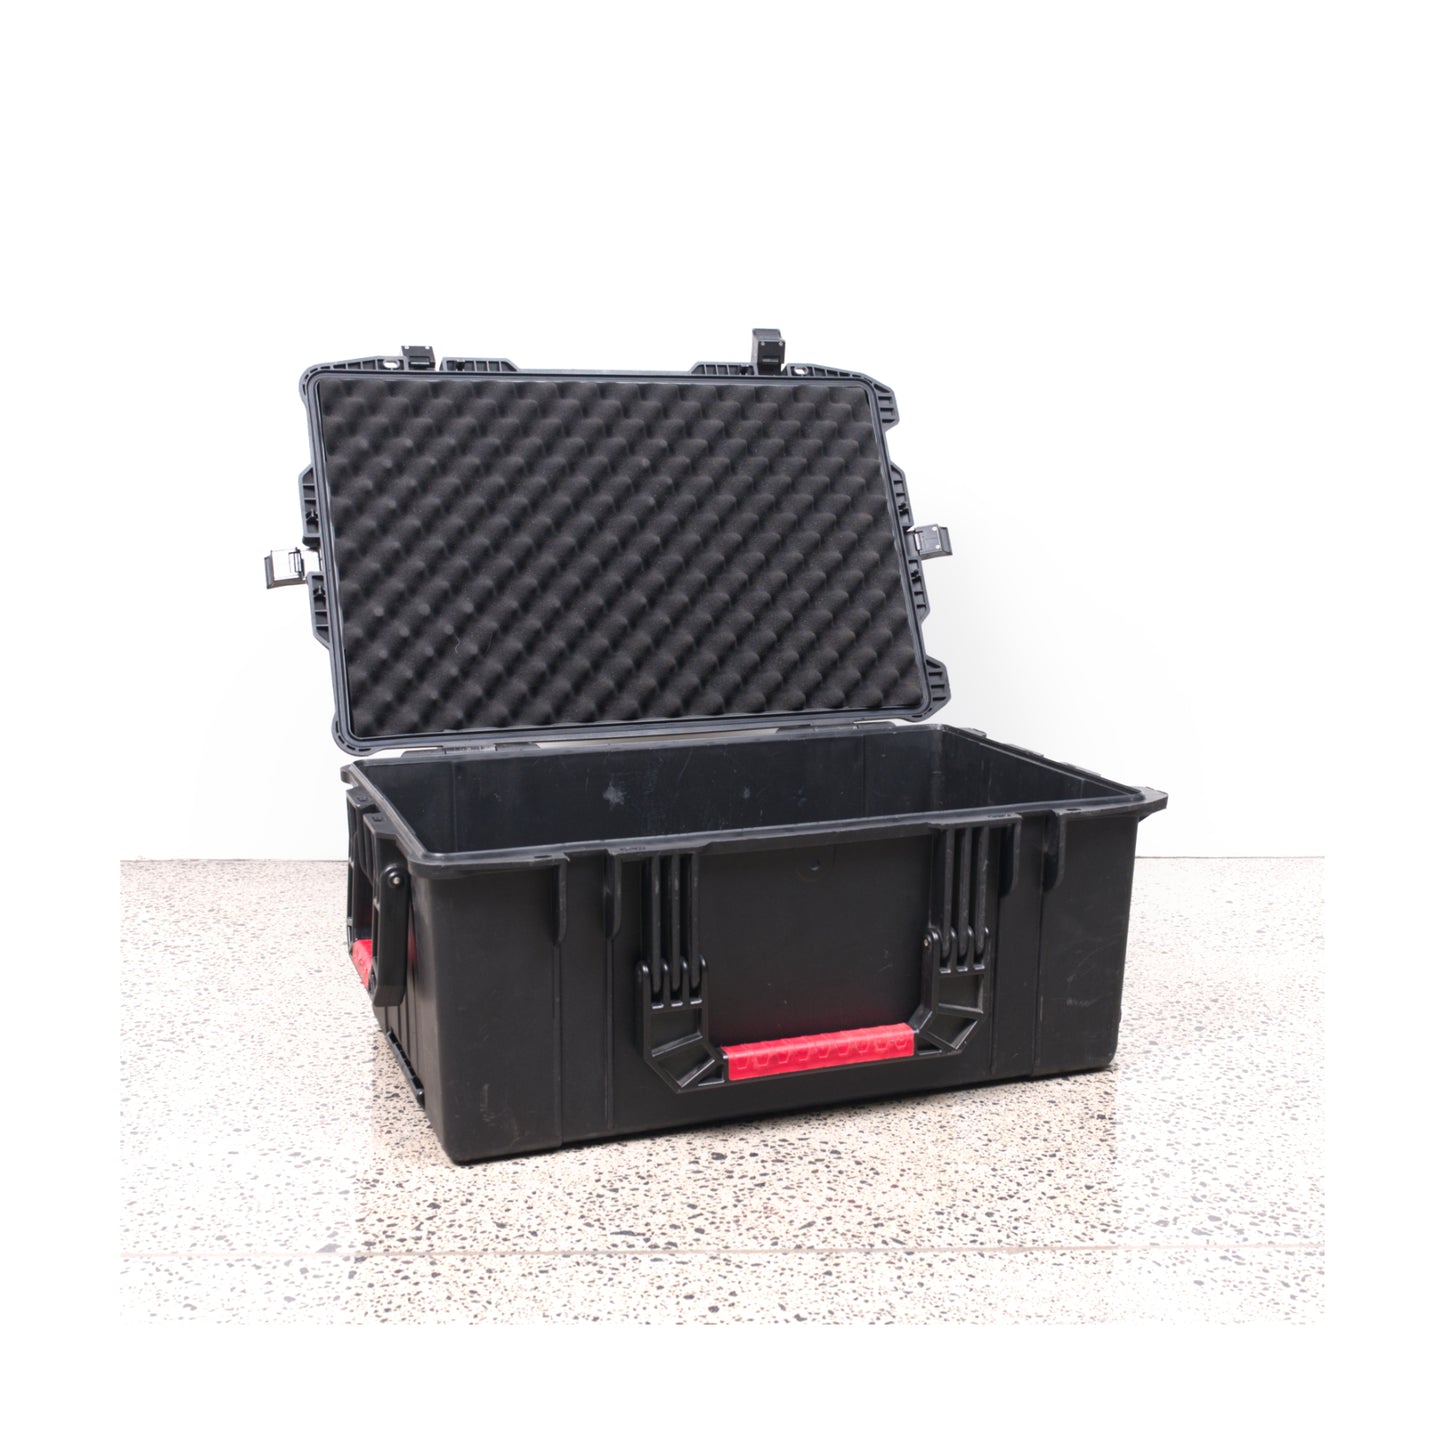 Buy Ex Rental DJI Wheeled Hard Case for Ronin 1 | Topic Rentals | Topic Store